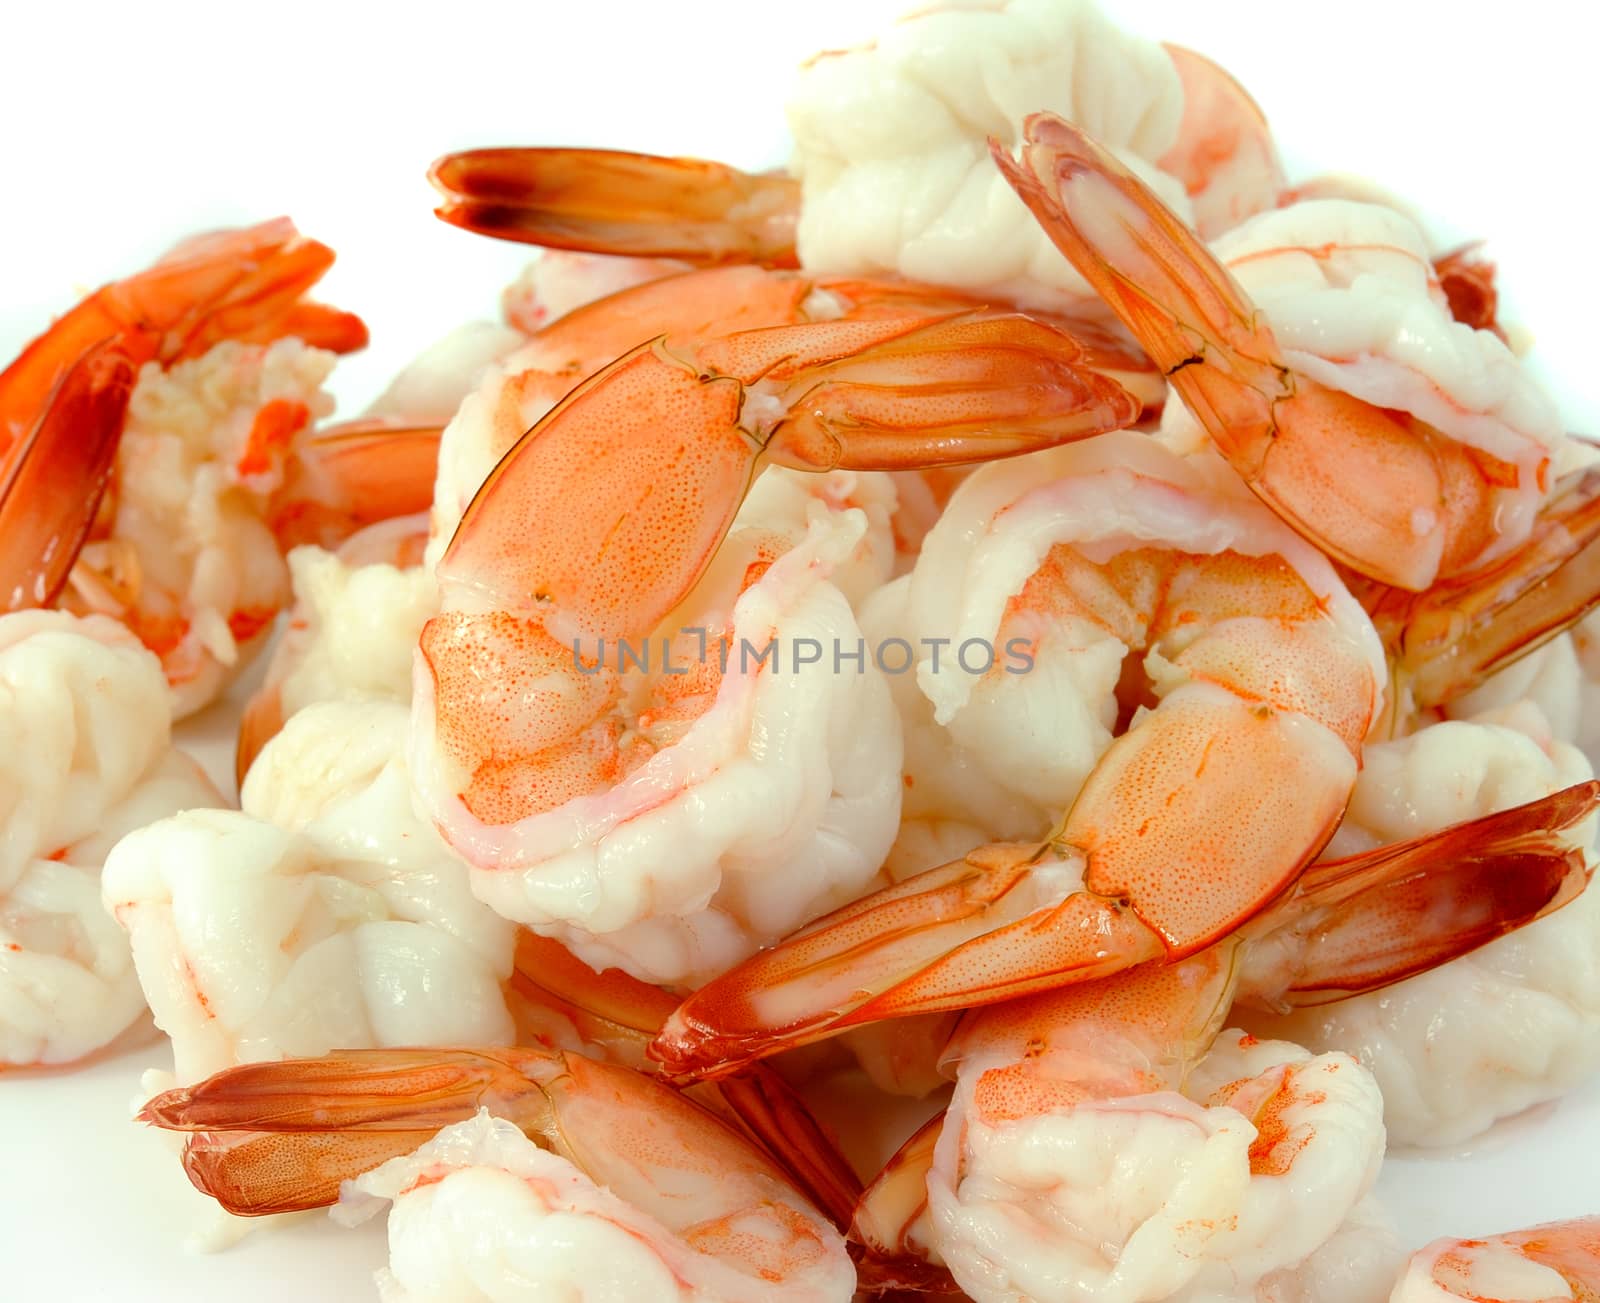  shrimps on a white background by sommai